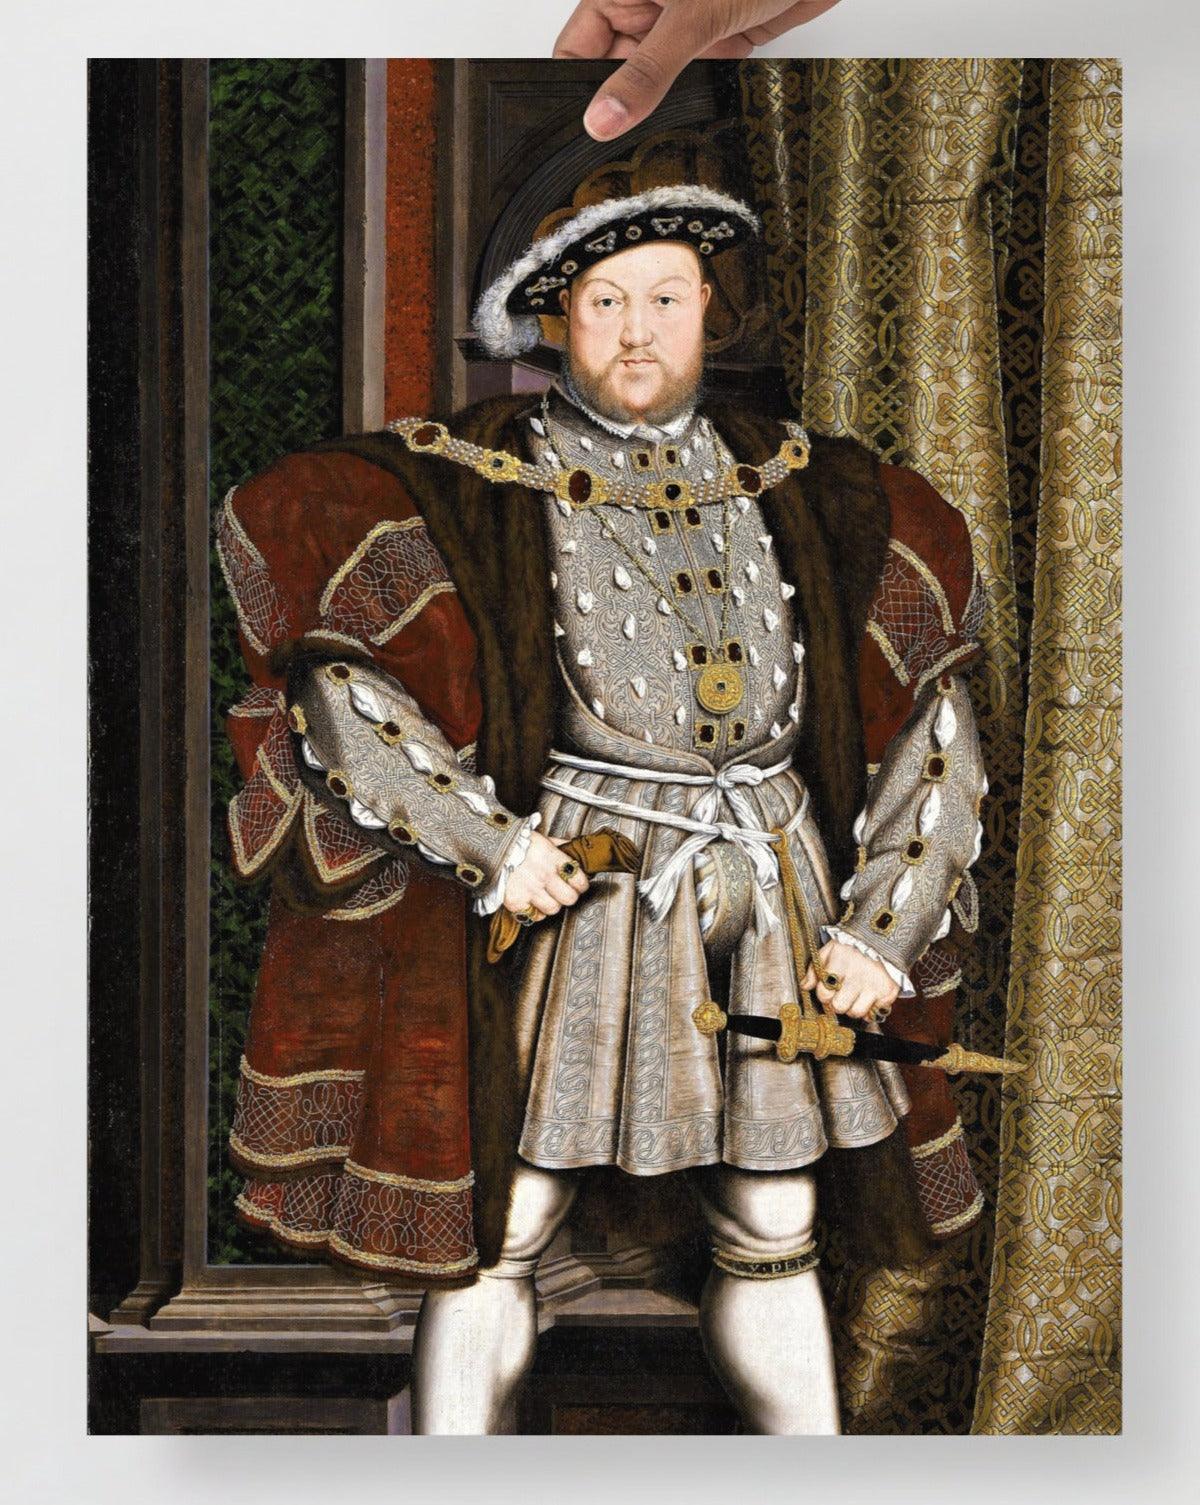 A Henry VIII Of England poster on a plain backdrop in size 18x24”.